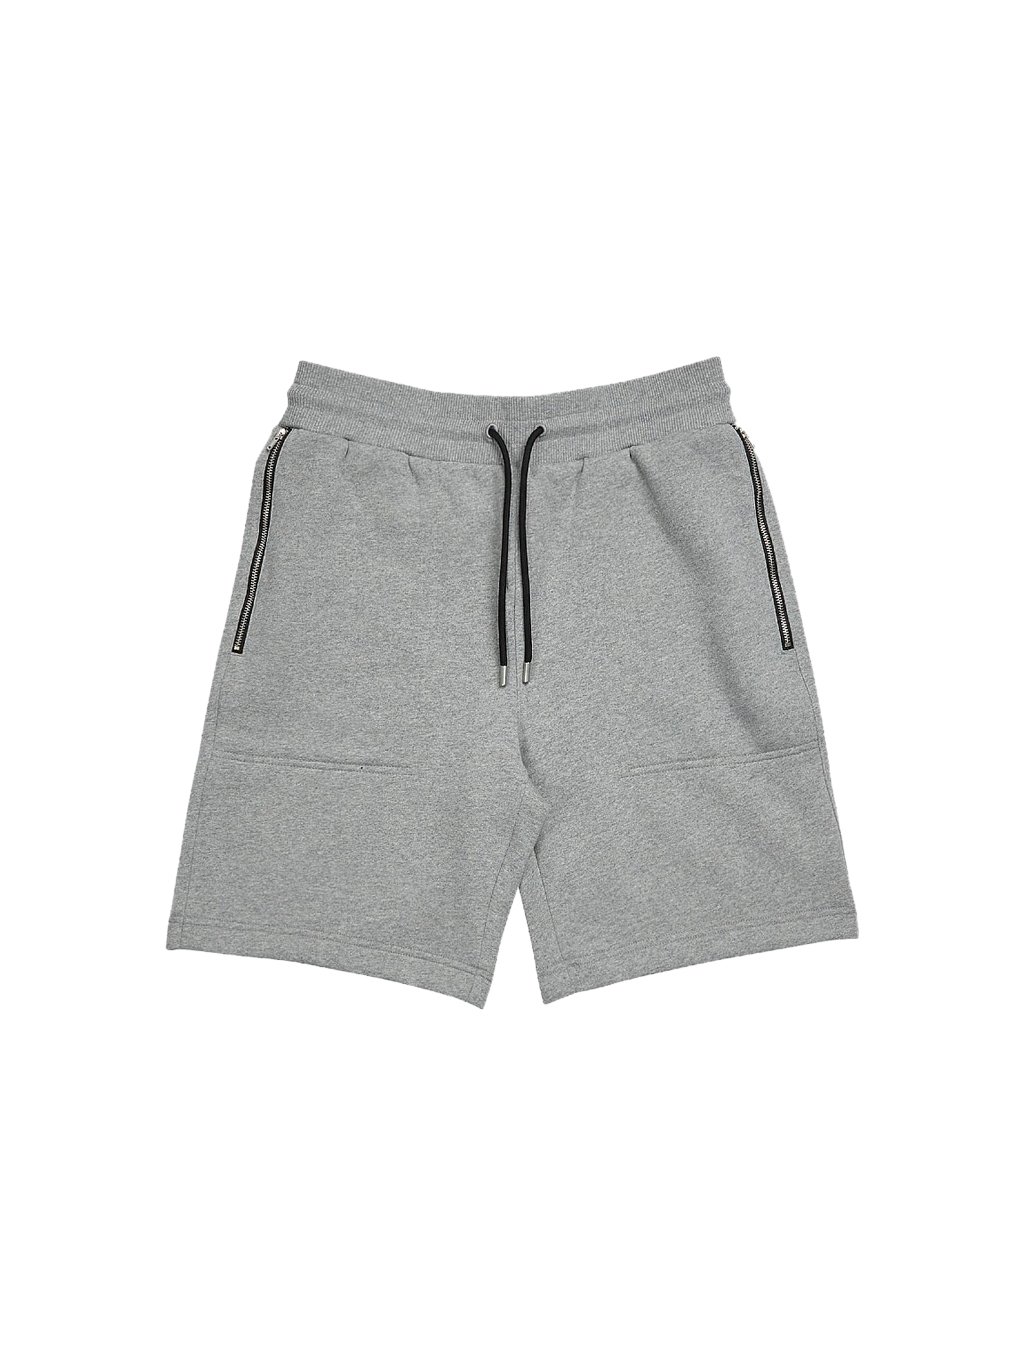 15 Best Shorts To Buy Right Now | Complex